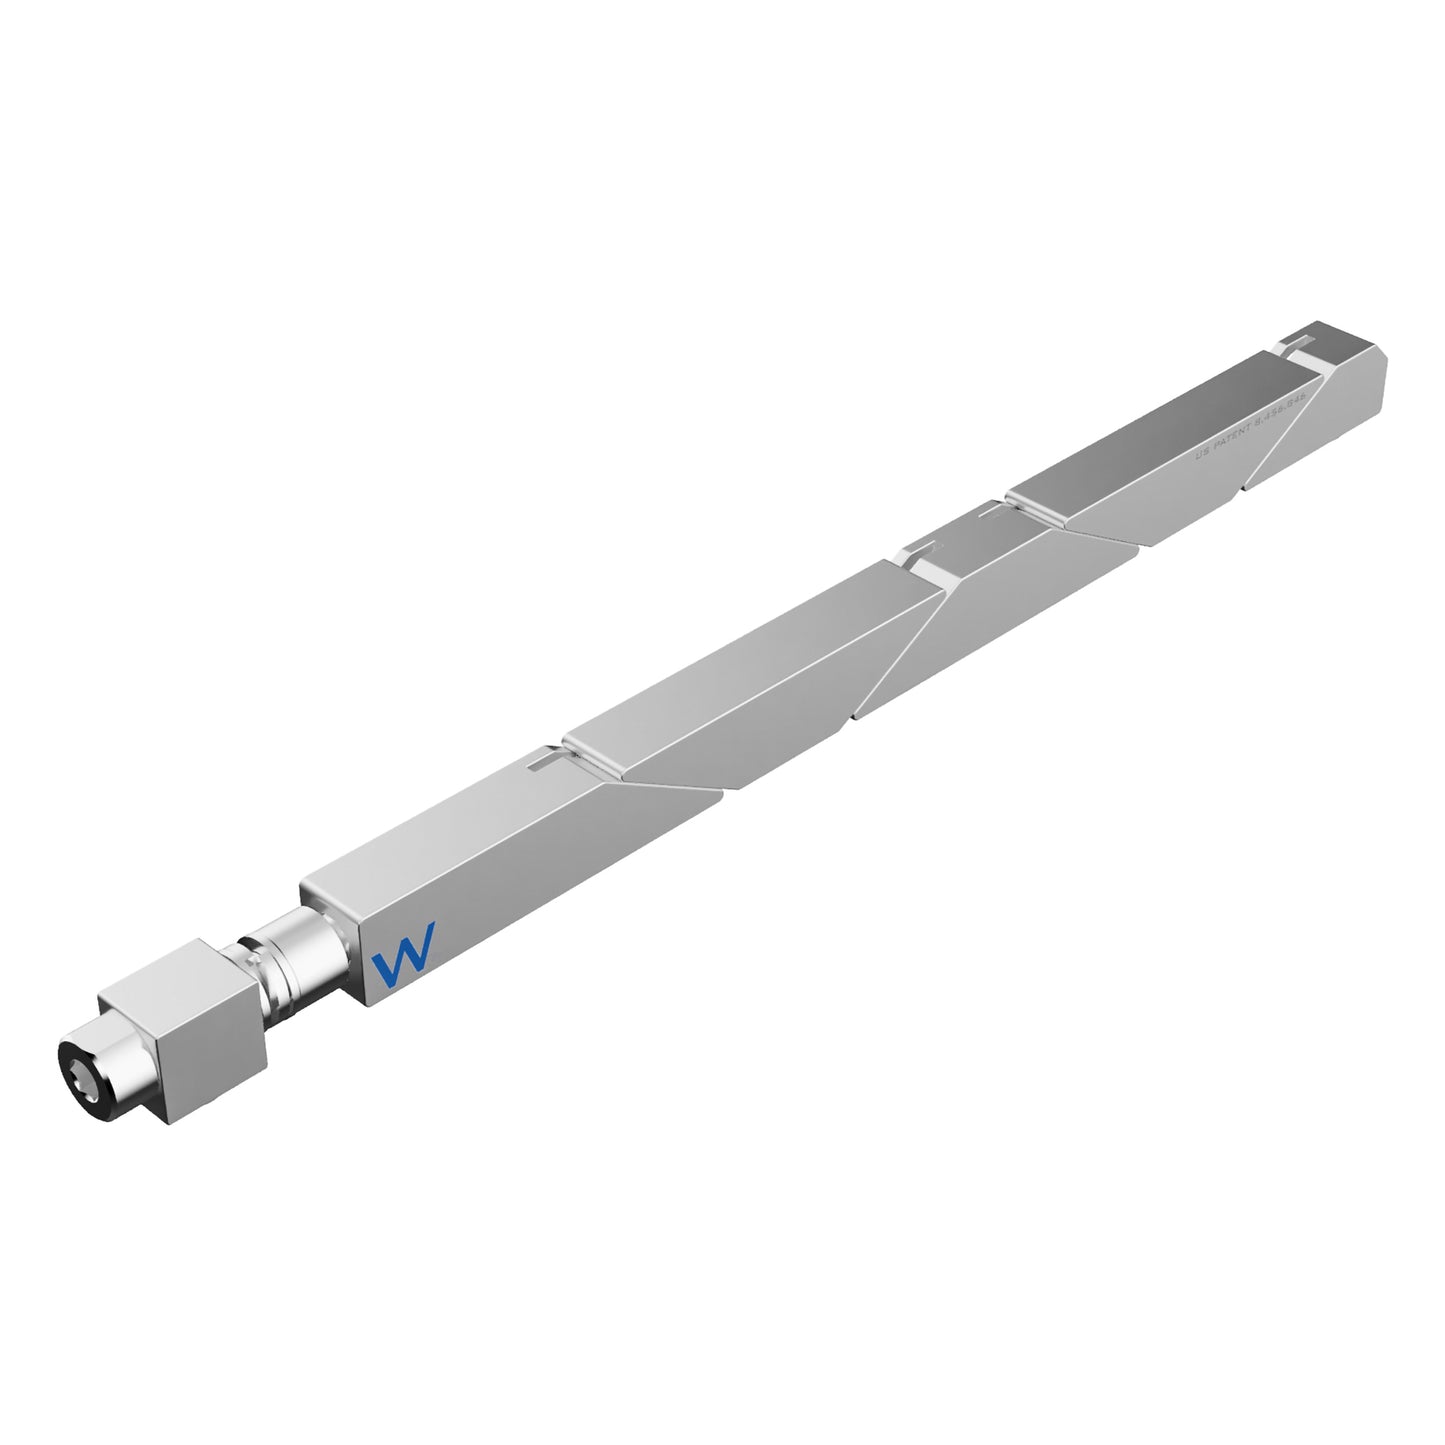 SW5-43-270-225 Max Force Wedgelock, segmented long rectulangular hardware component, Clear Chemical Film Finish